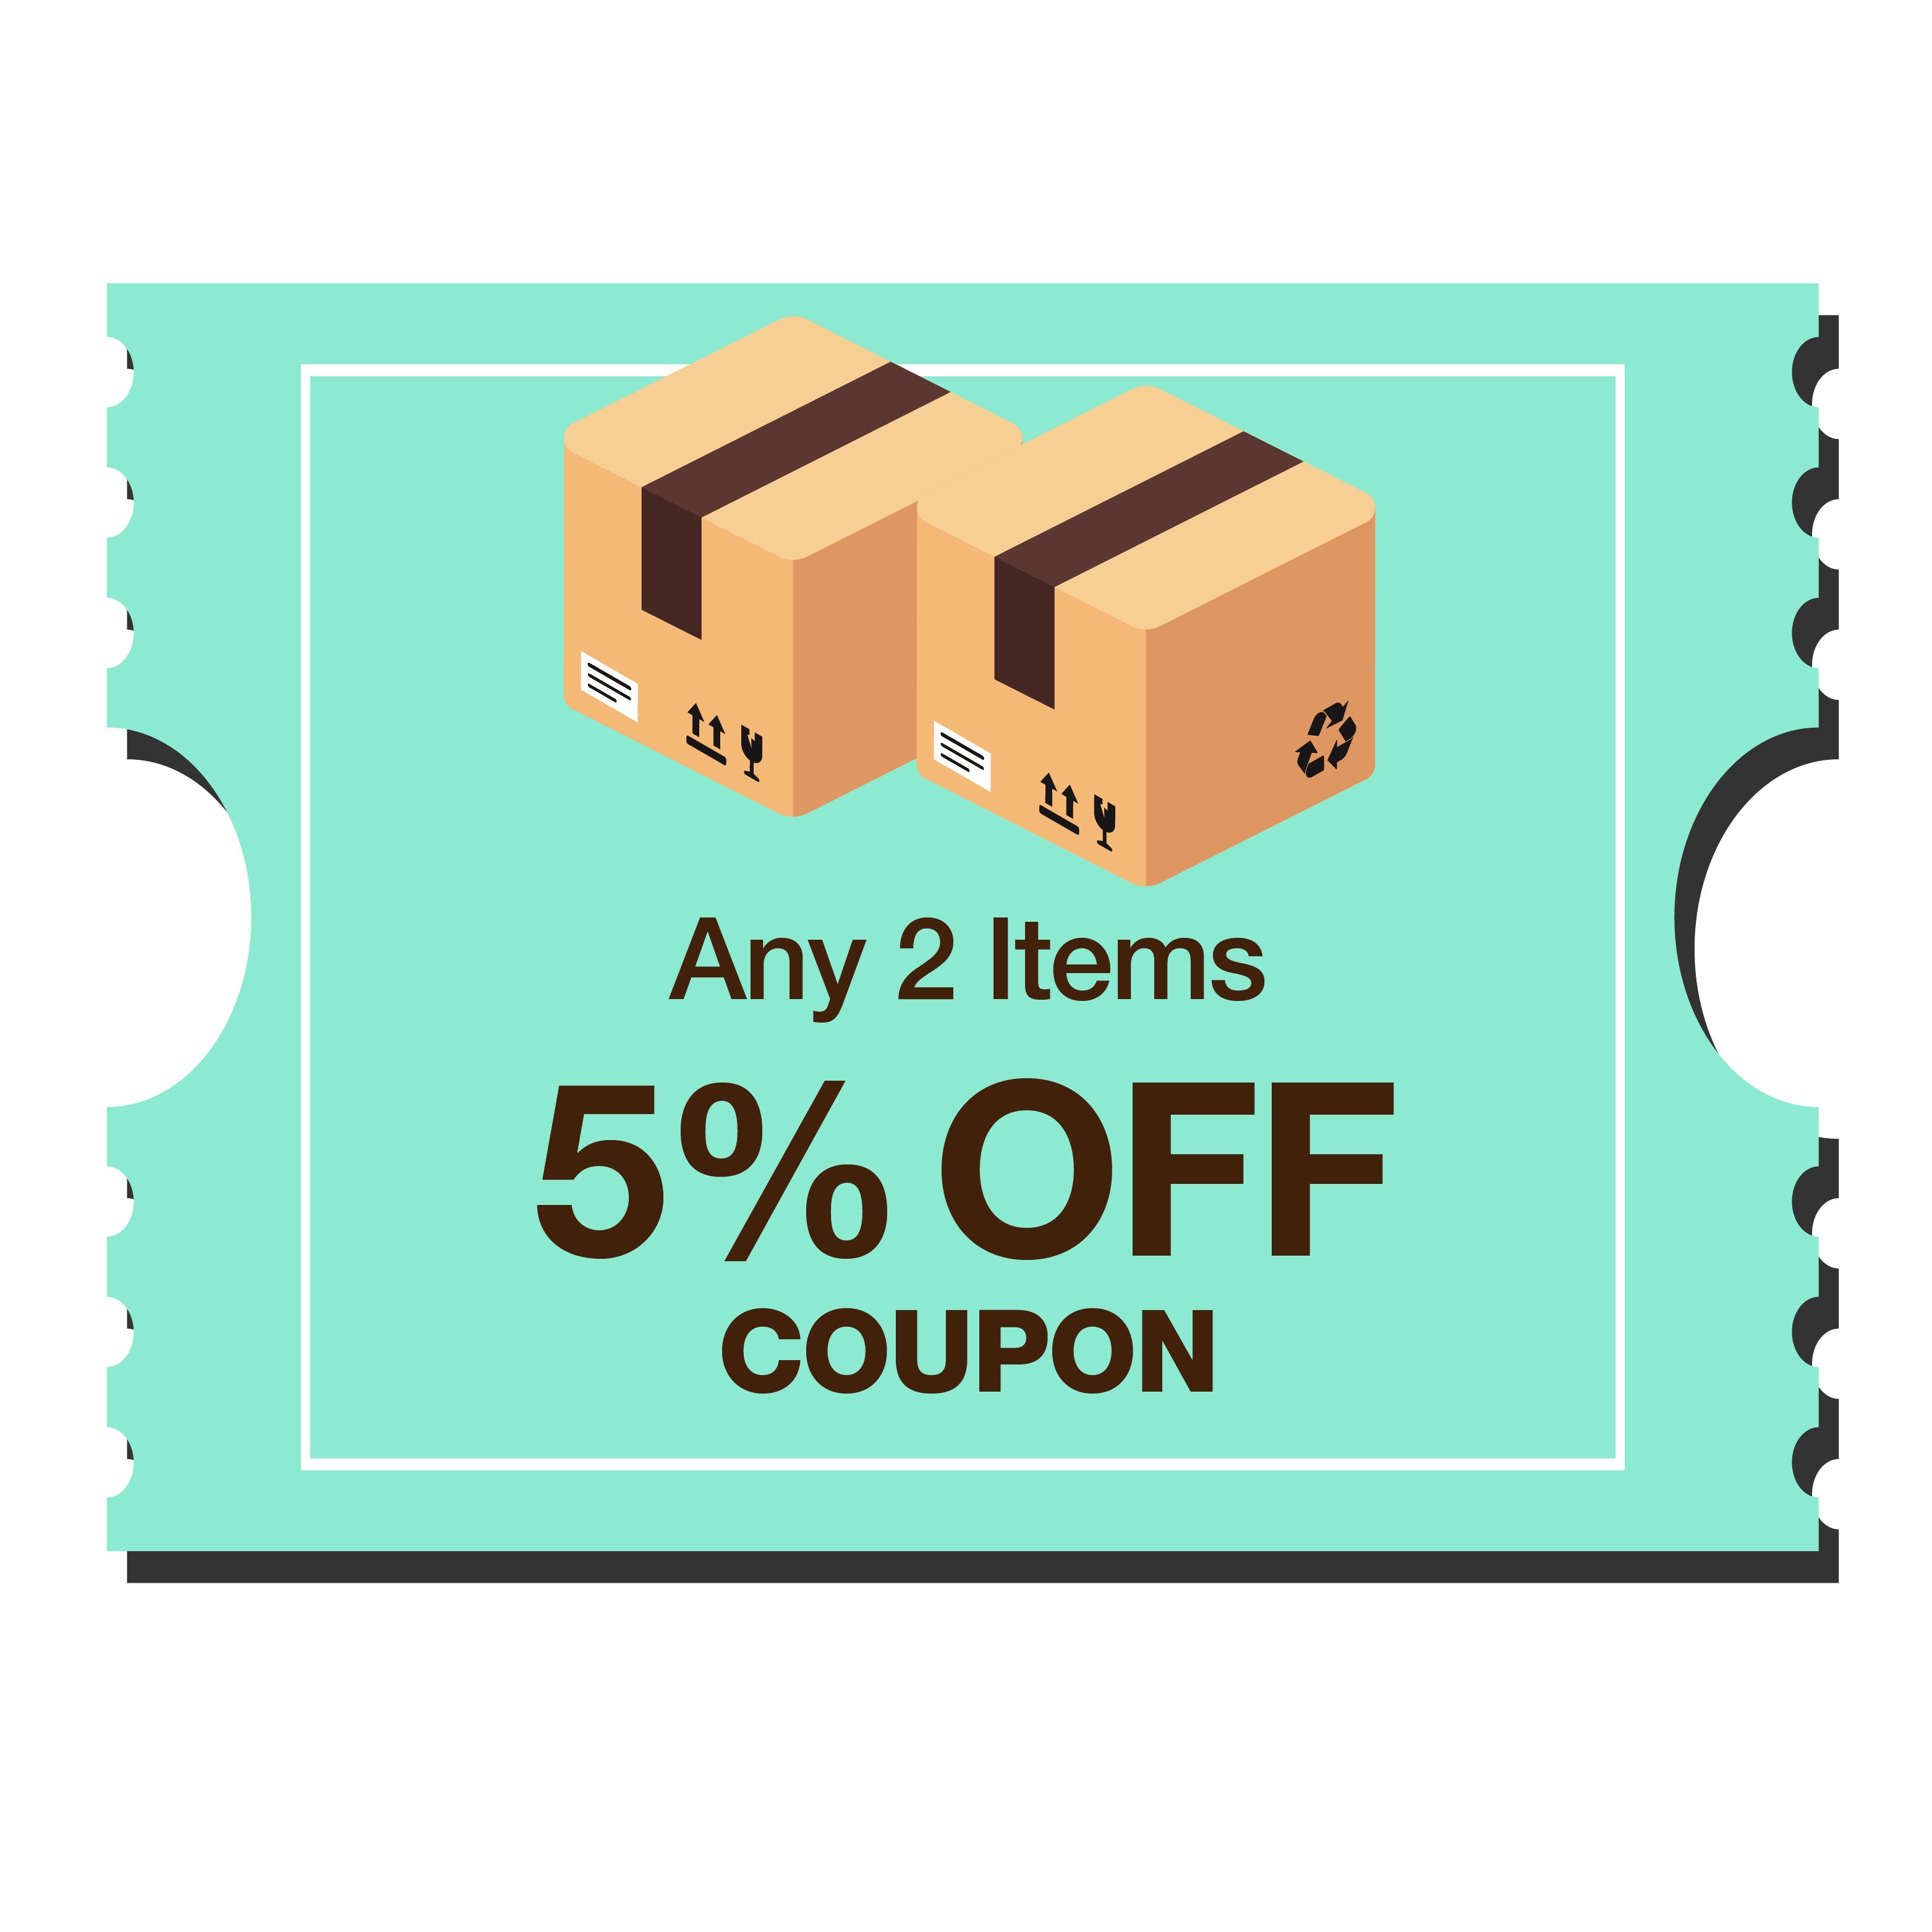 5% OFF Coupon for Any 2 Items